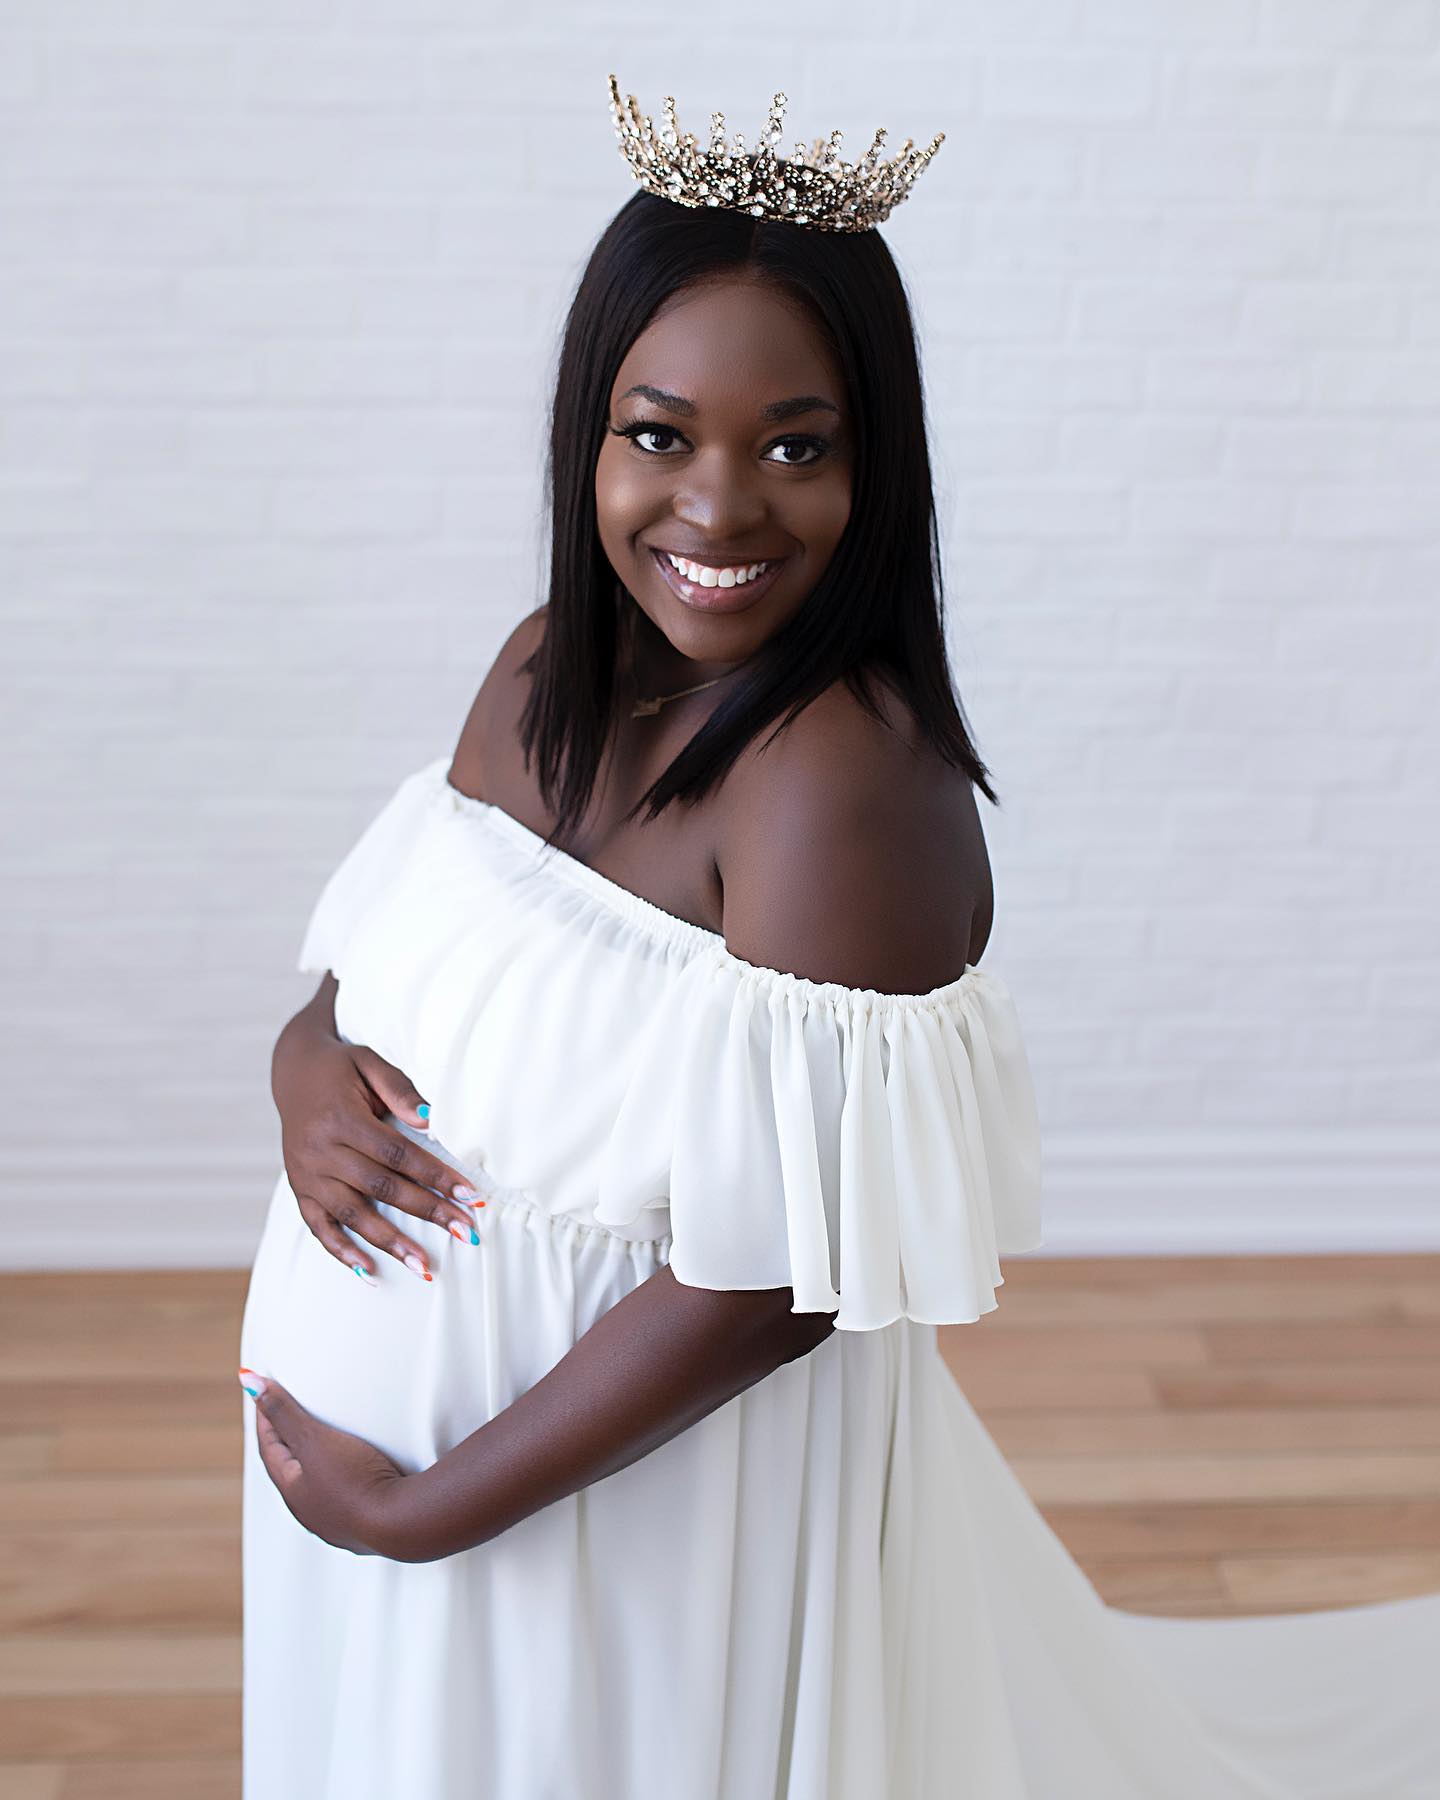 Chanelle is wearing our stunning Vera Gown. Doesn’t she look like a Goddess? 😍🥰 

Are you expecting? 
Want to treat yourself to a day of being pampered while creating stunning memories you’ll cherish forever? The best time to do your maternity portrait session is between 28-34 weeks. 

@wtnpodcast  @itzjustchanelle 

#oshawanewbornphotographer #oshawaphotographer #whitbynewbornphotographer #ajaxnewbornphotographer #bowmanvillenewbornphotographer #oshawanewbornphotography #oshawamoms #durhamregionmoms 

#oshawamaternityphotographer #oshawamaternityphotography #bowmanvillematernityphotographer #bowmanvillematernityphotography #ajaxmaternityphotographer #ajaxmaternityphotography #whitbymaternityphotographer #whitbymaternityphotography #durhamregionmaternityphotographer #durhamregionmaternityphotography #wtnpodcast #wtnpodcastmoms #veragown